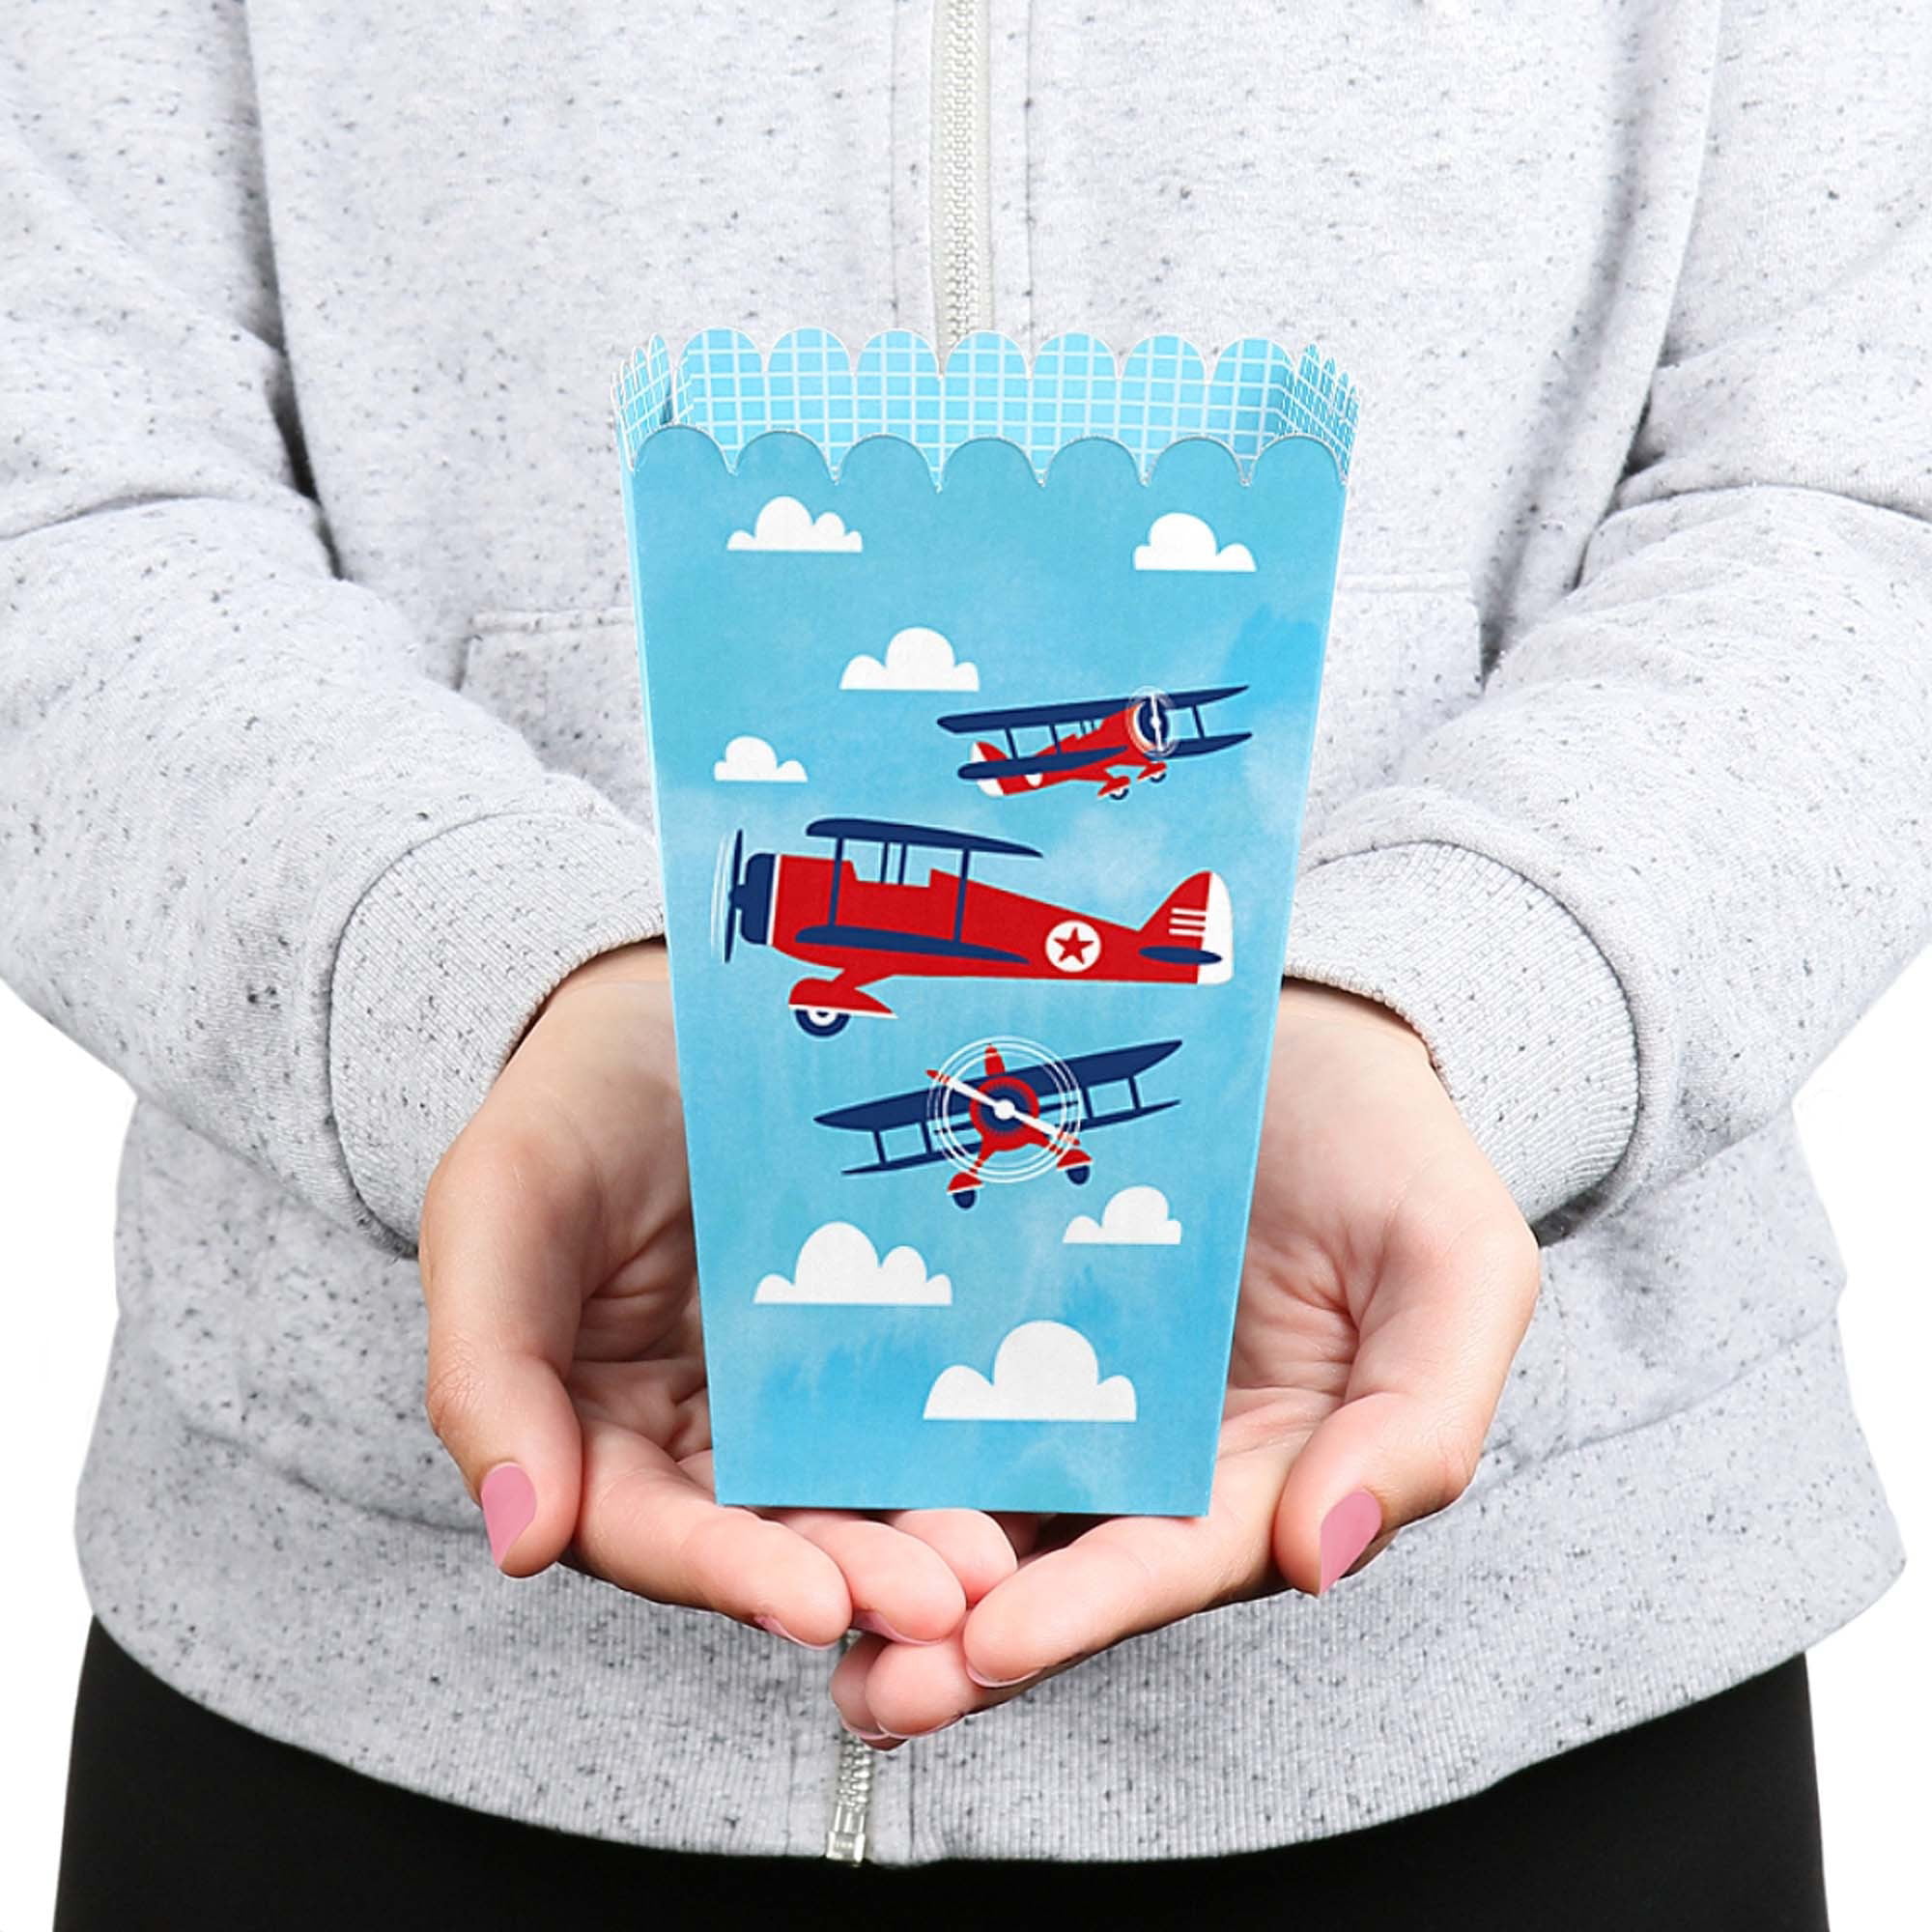 Airplane Favor Snack Boxes for Travel Adventure themed Kids birthday party  supplies, pilot up up and away parties, cloud themes. Set of 12 Reversible